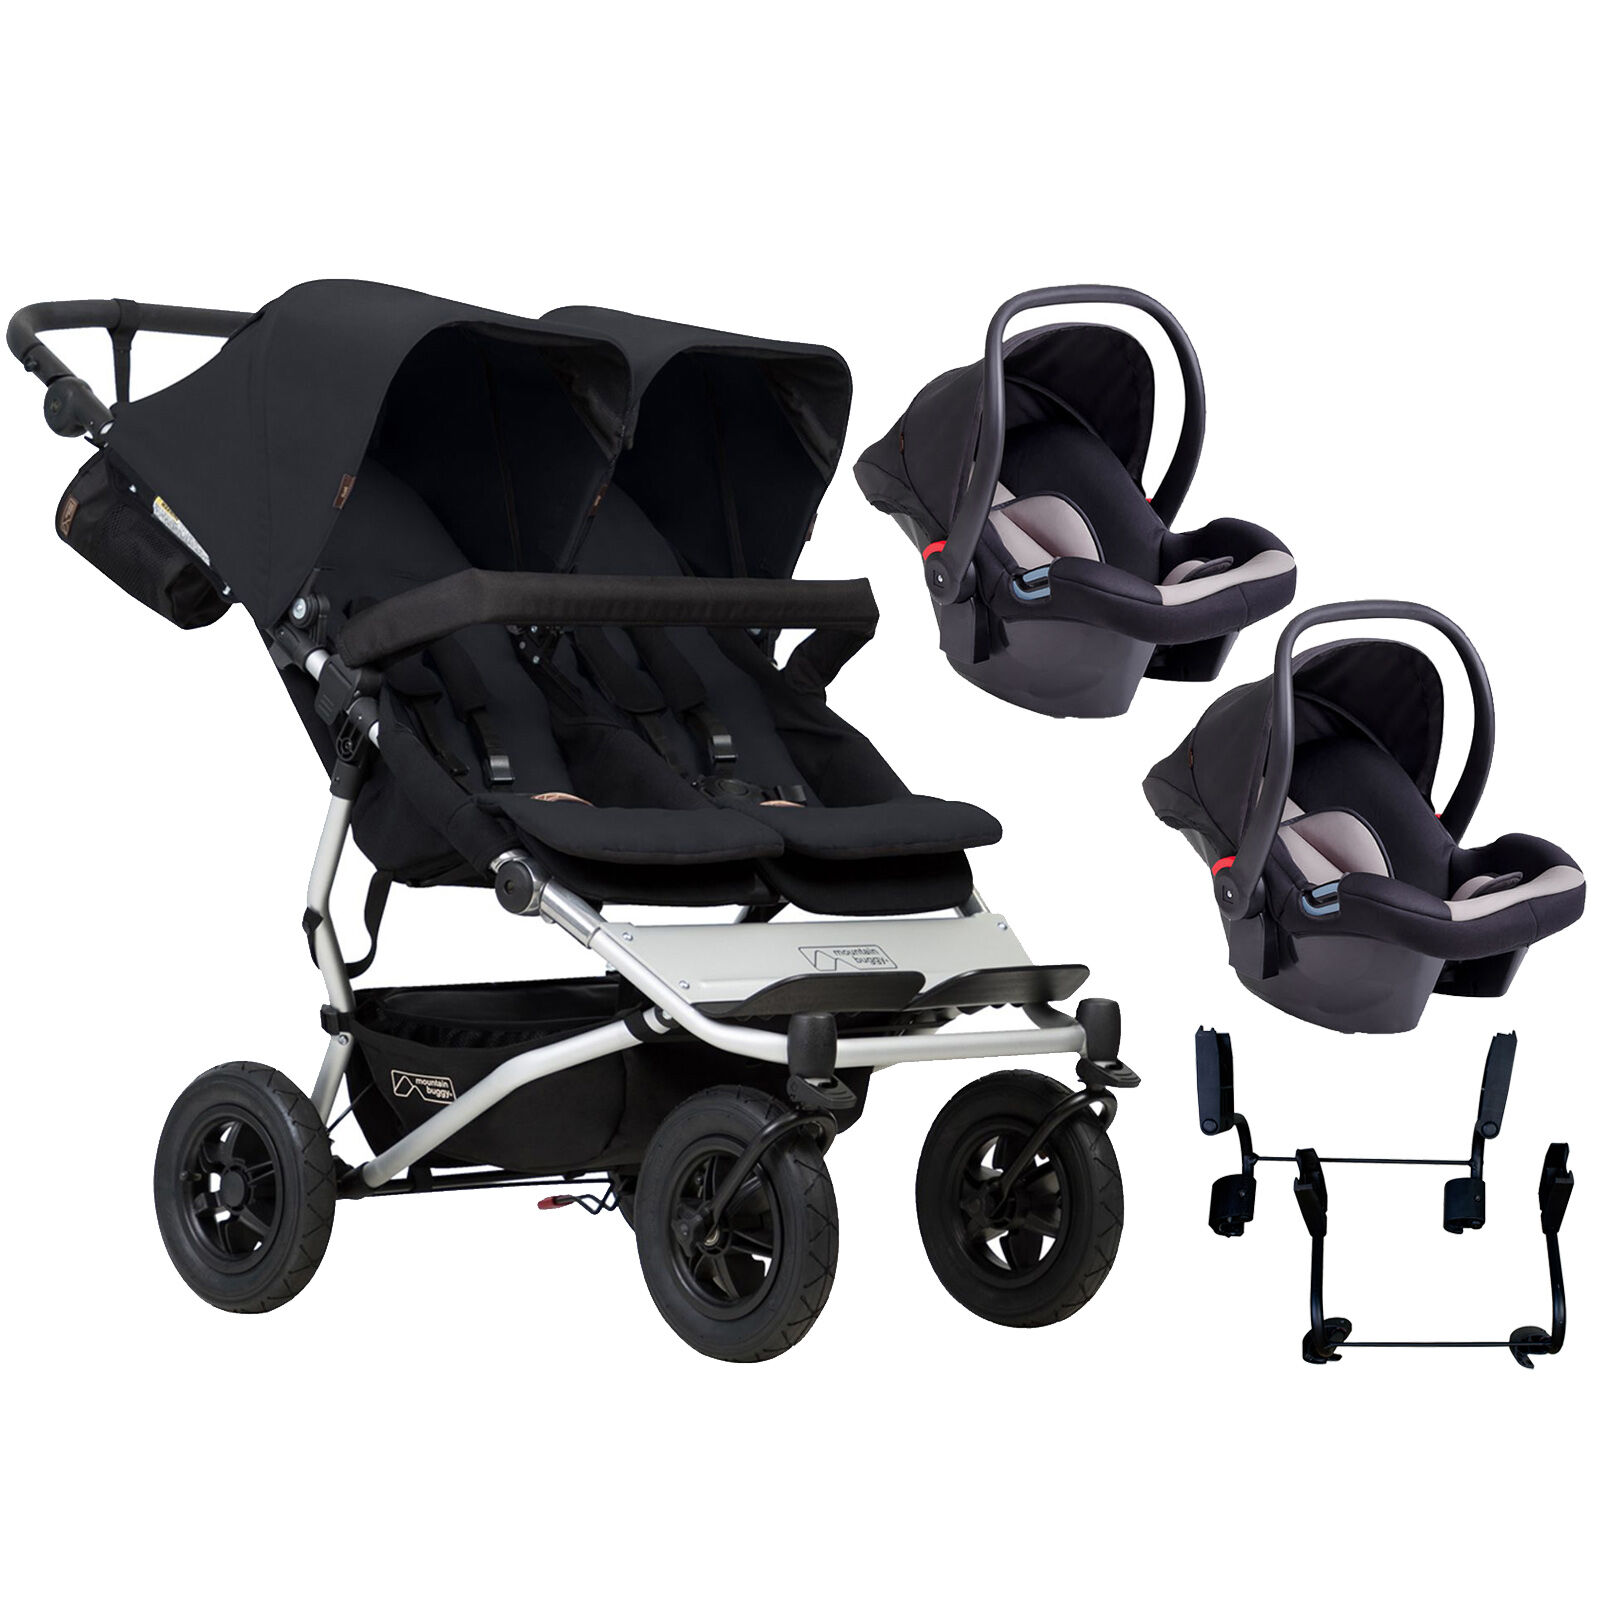 Mountain Buggy Duet V3 Double Travel System - Black